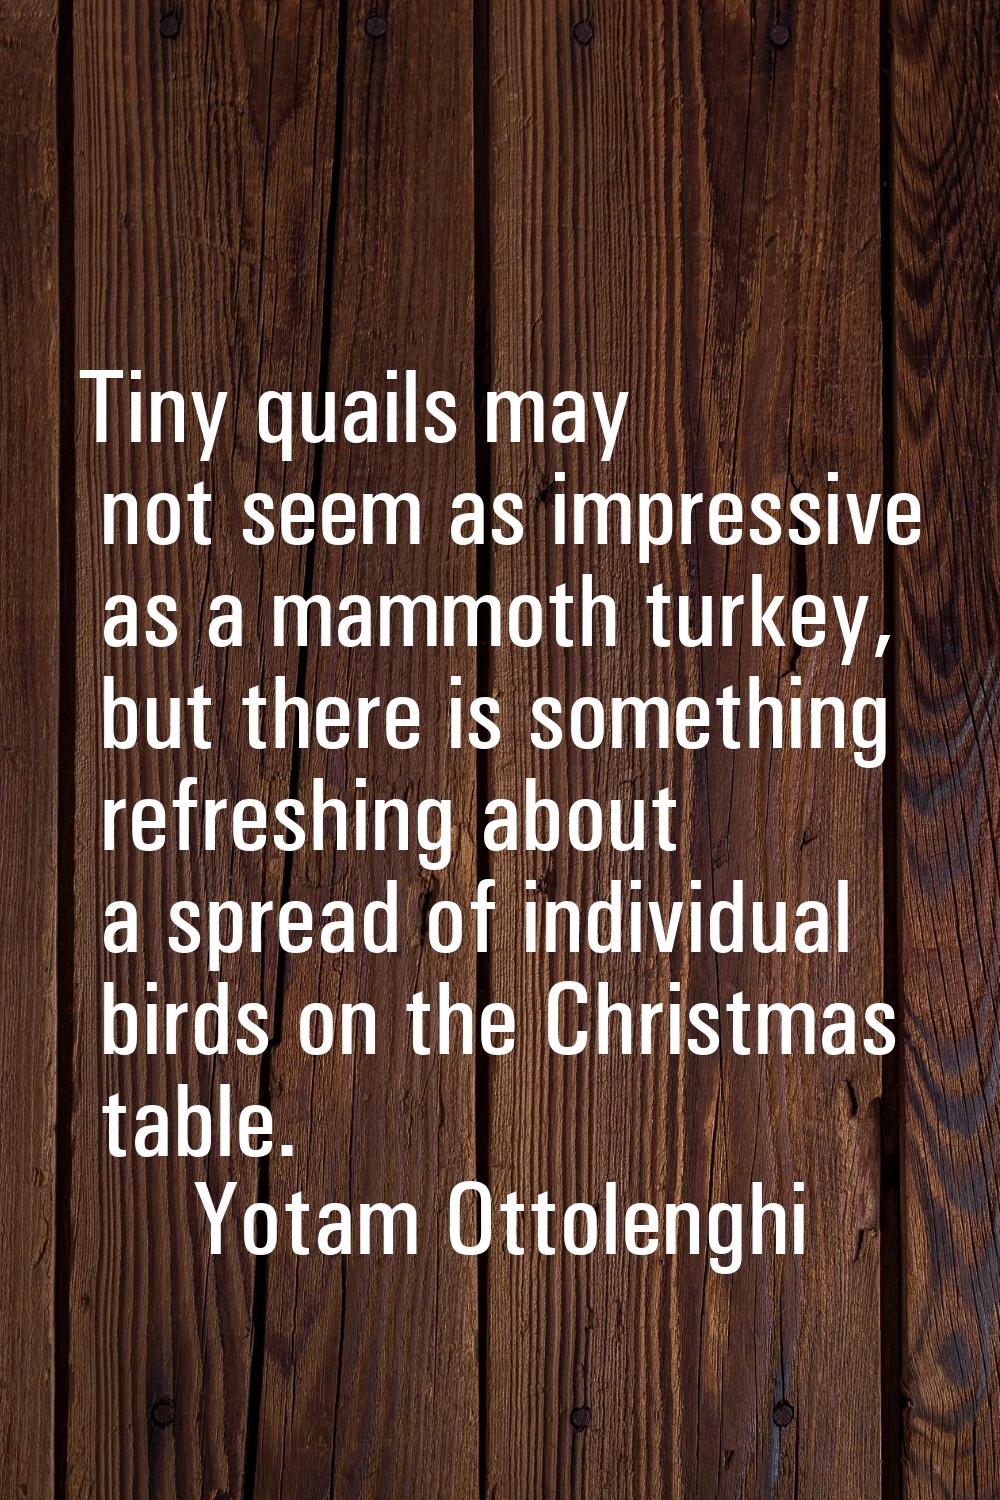 Tiny quails may not seem as impressive as a mammoth turkey, but there is something refreshing about